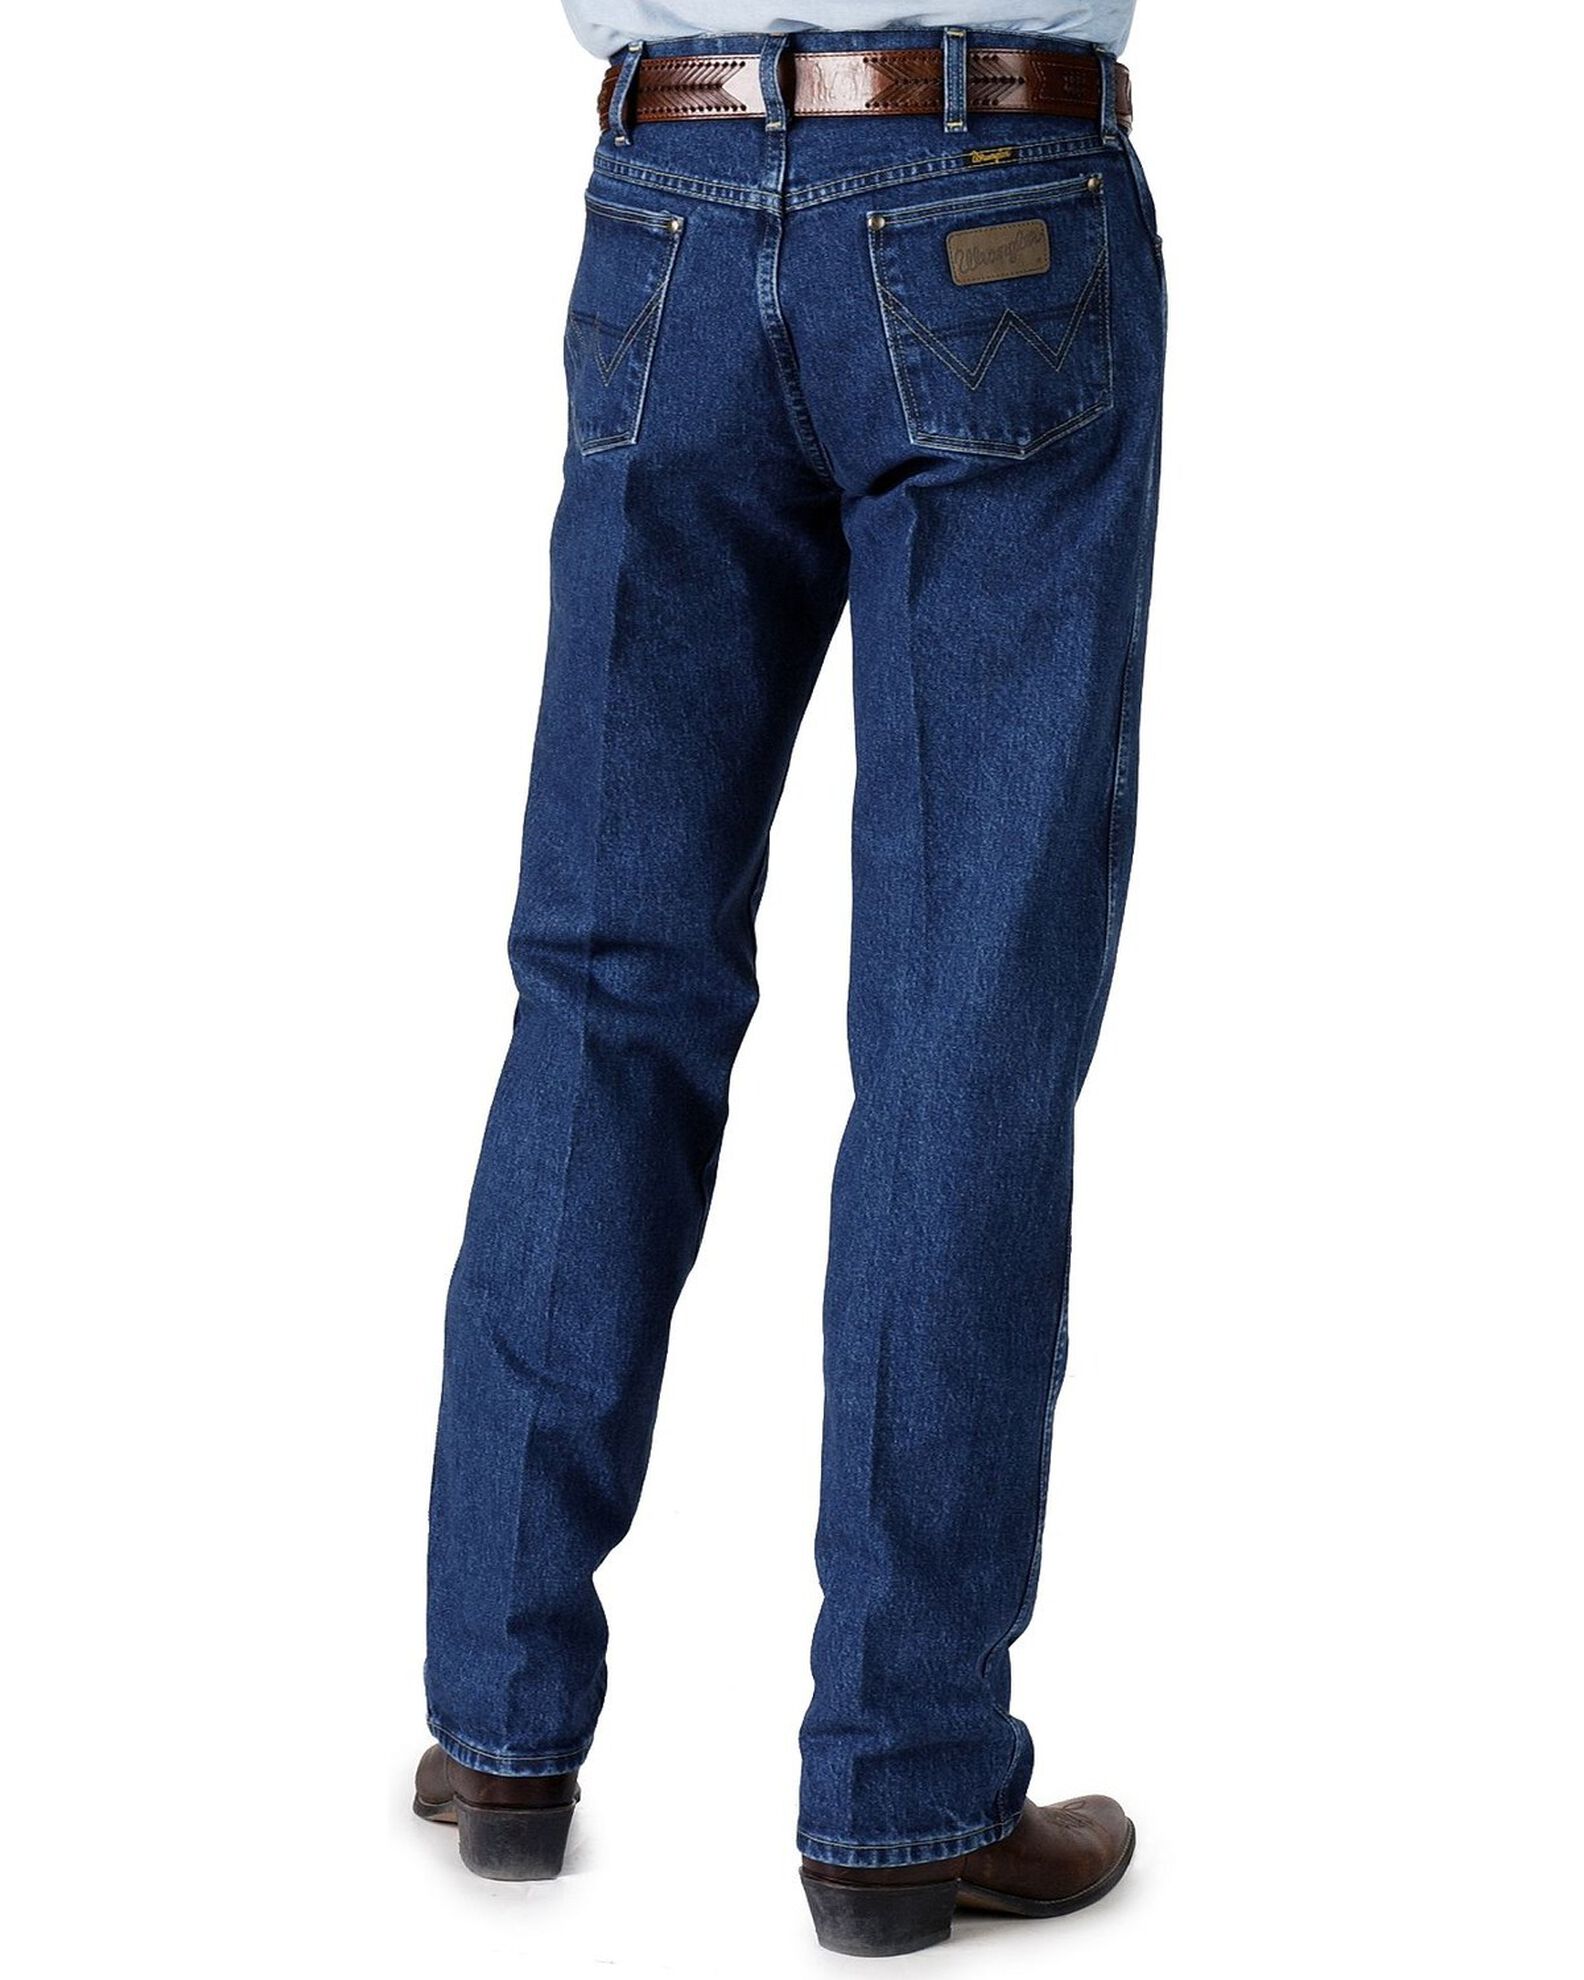 Wrangler Jeans - 31MWZ George Strait Relaxed Fit | Boot Barn